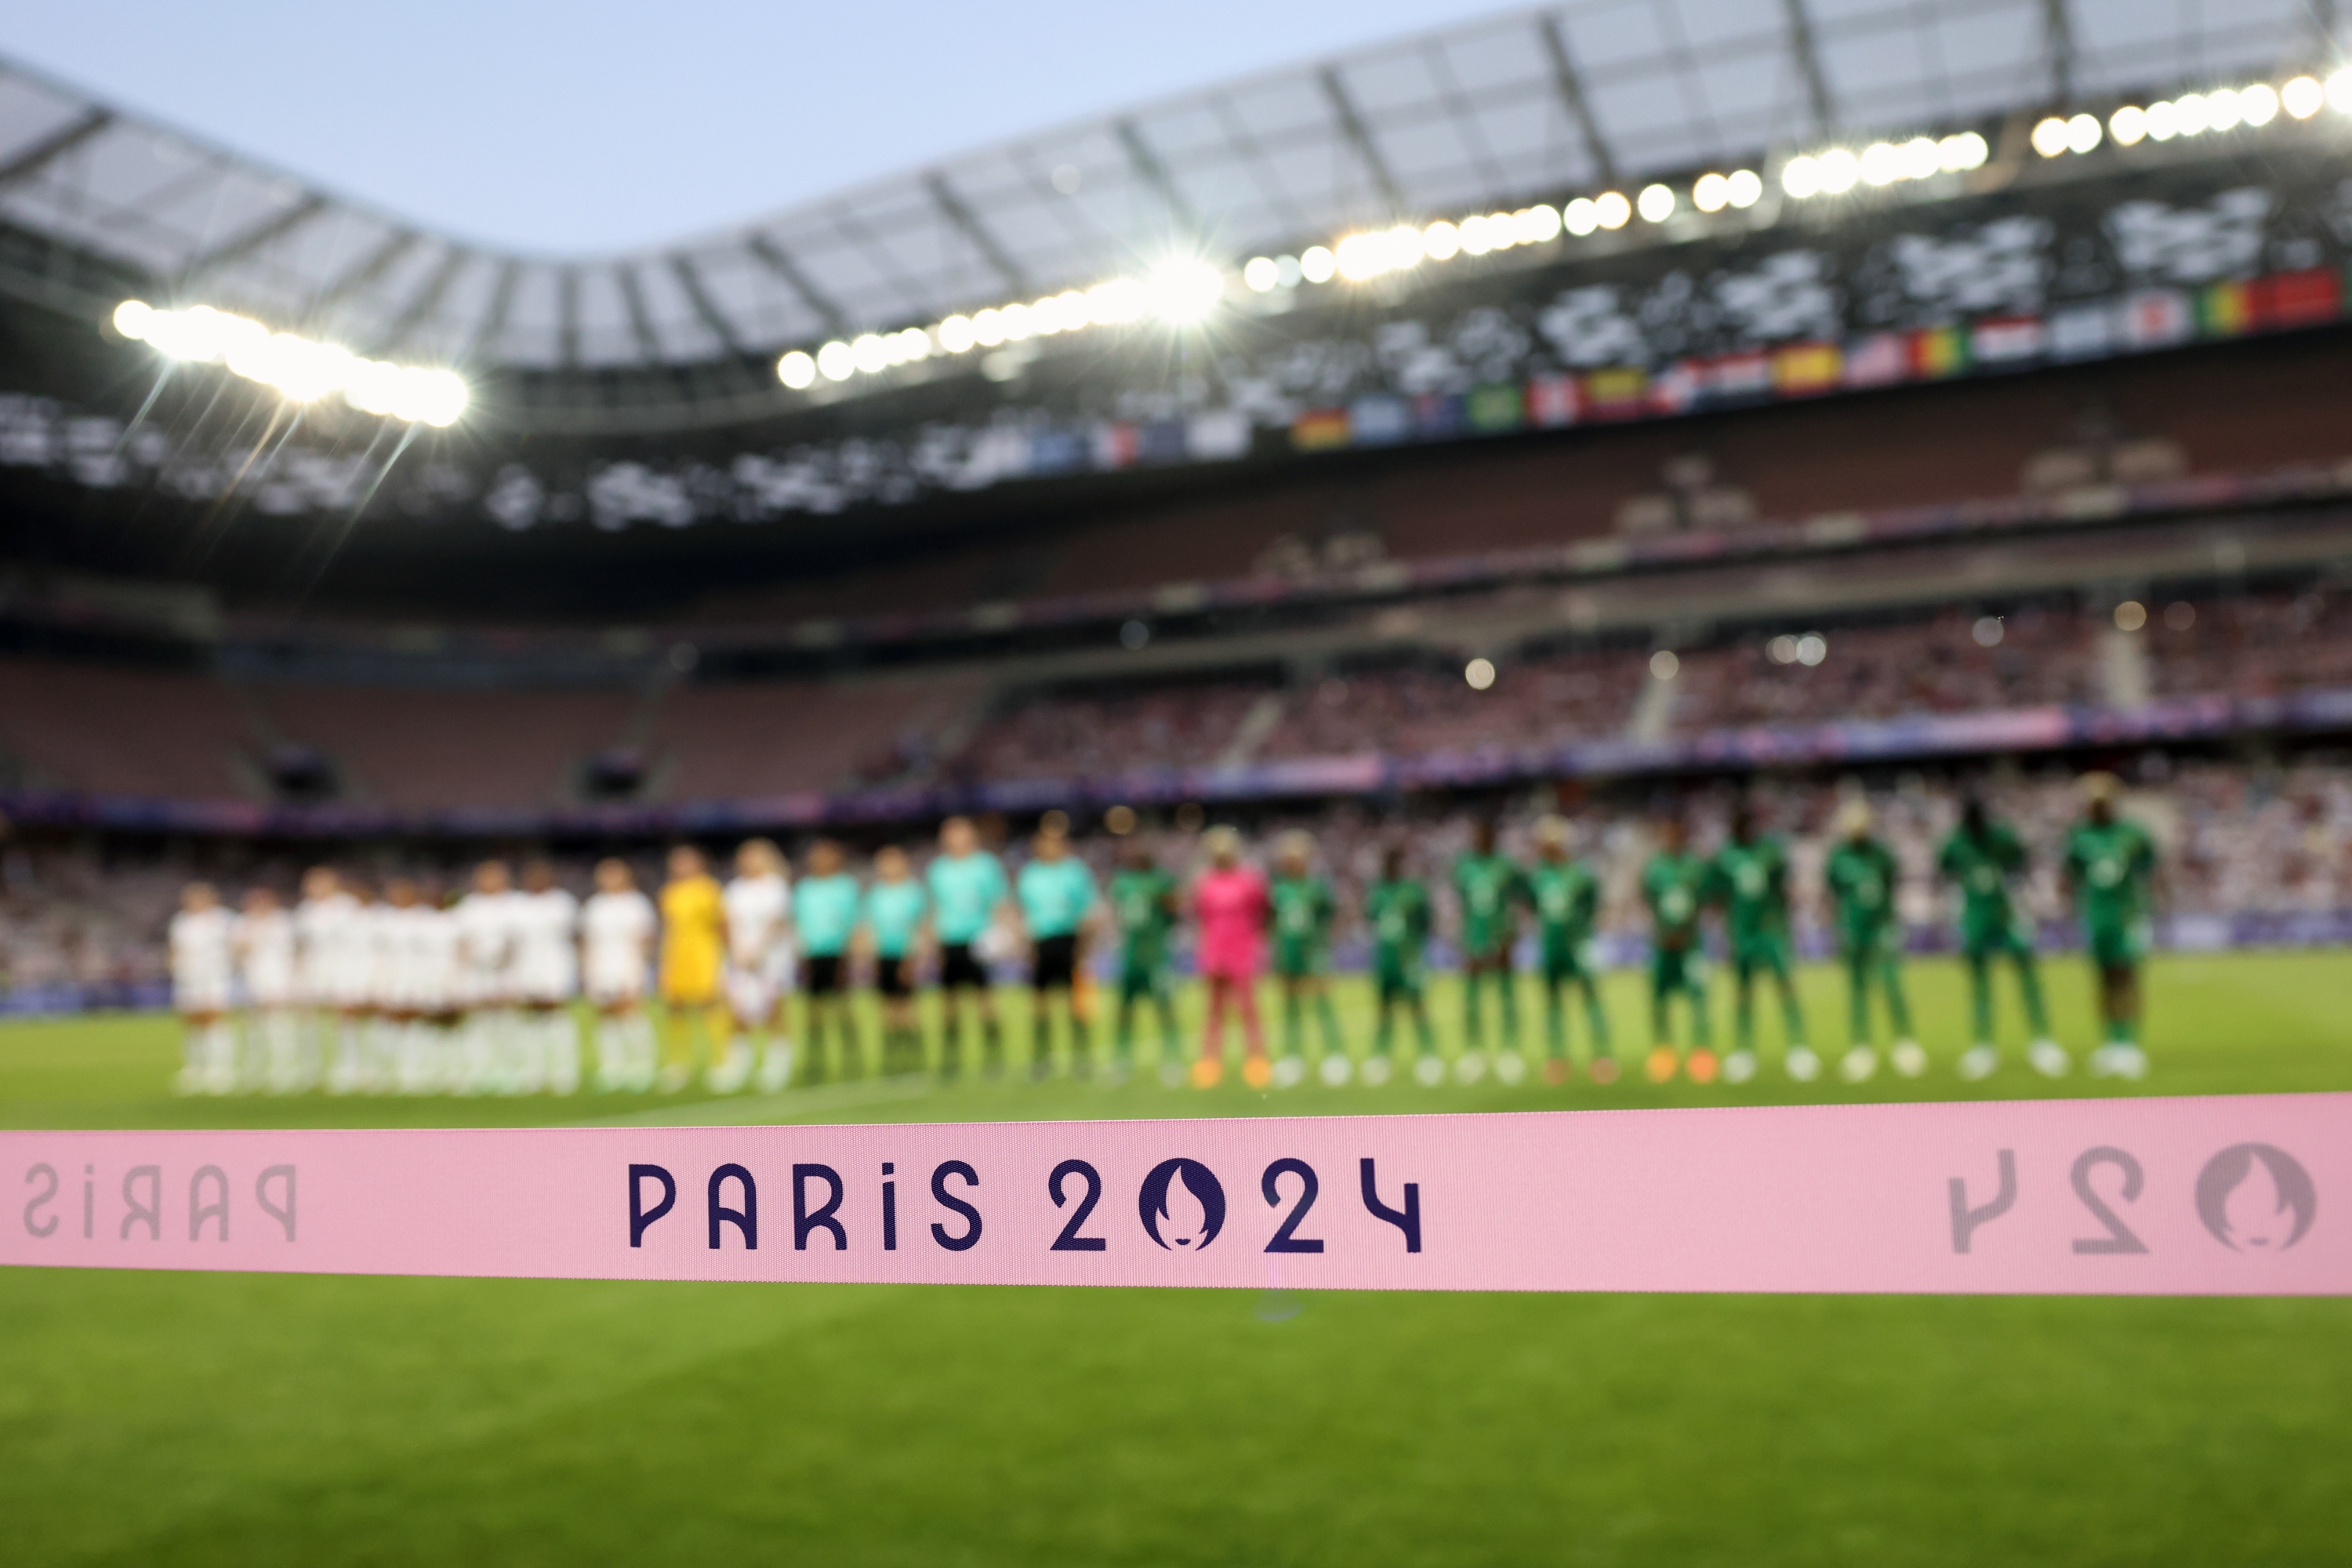 NICE, FRANCE - JULY 25: Paris 2024 Olympic branding is seen as the teams line up for the National anthems during the Women's group B match between United States and Zambia during the Olympic Games Paris 2024 at Stade de Nice on July 25, 2024 in Nice, France. (Photo by Marc Atkins/Getty Images)